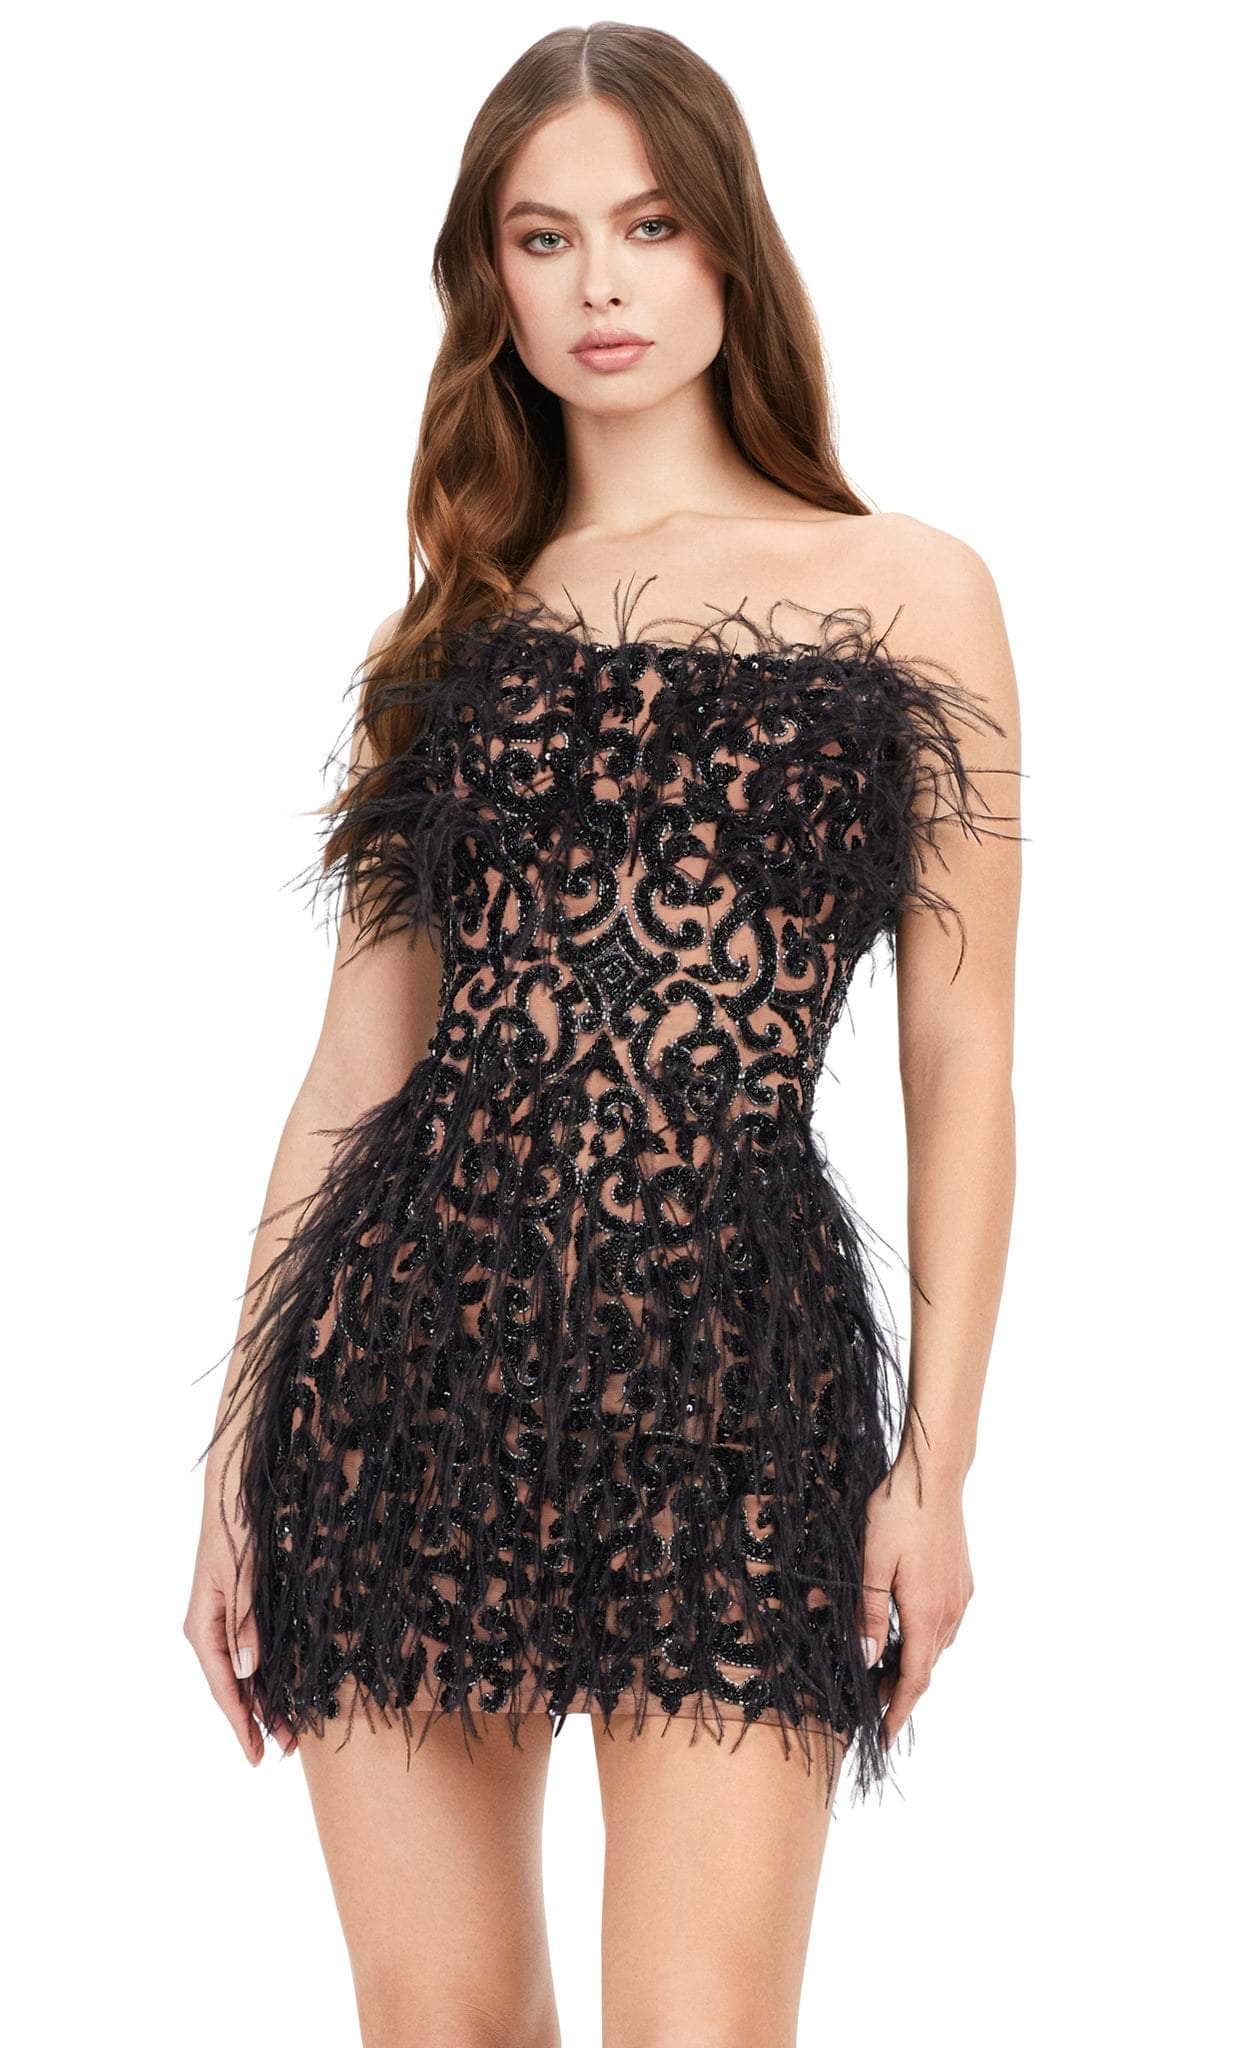 Ashley Lauren 4615 - Beaded Strapless Feather Cocktail Dress
